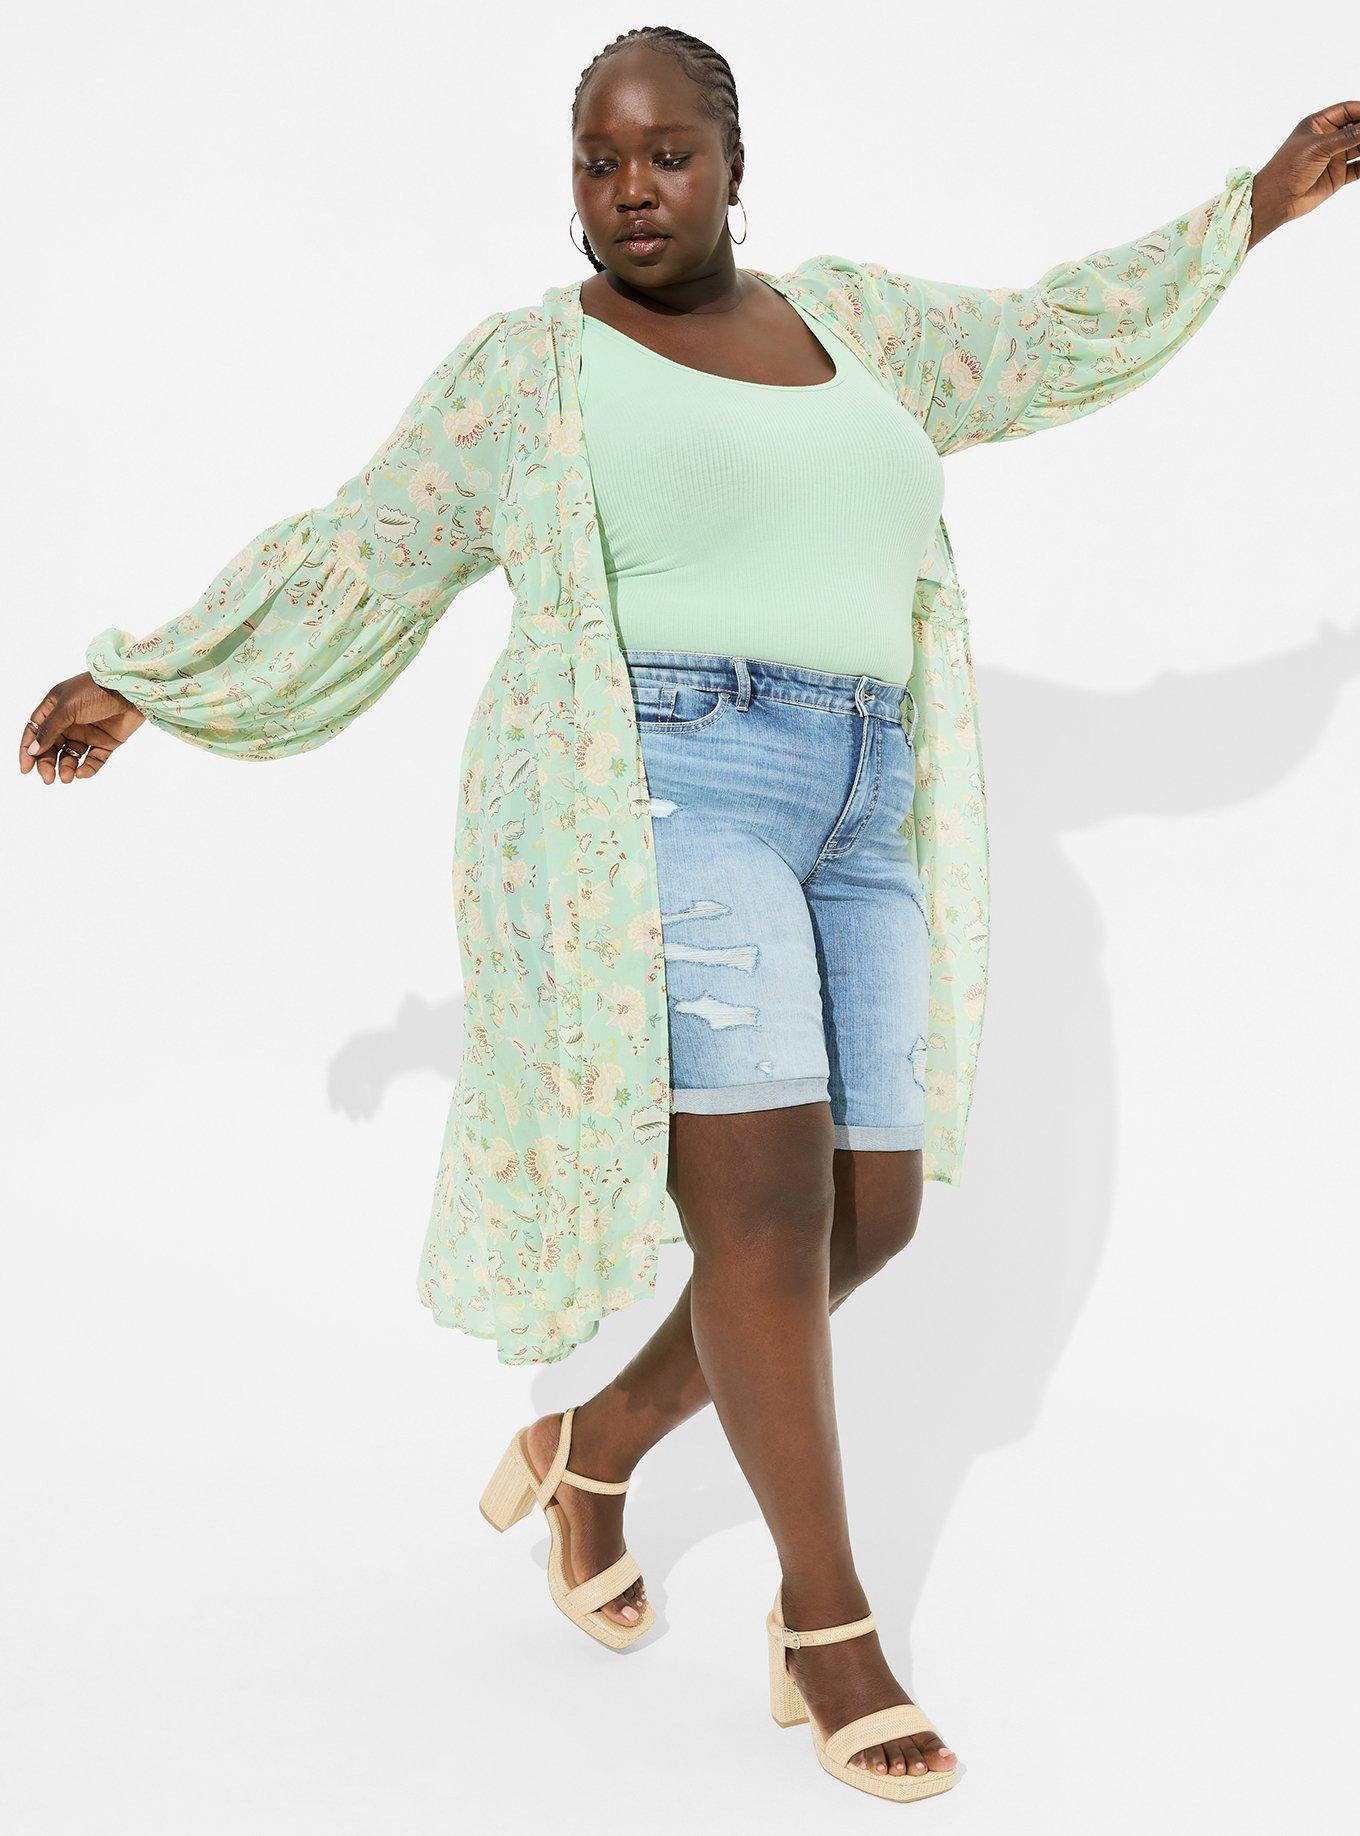 Trying Out Torrid: my first impressions of this trendy plus size